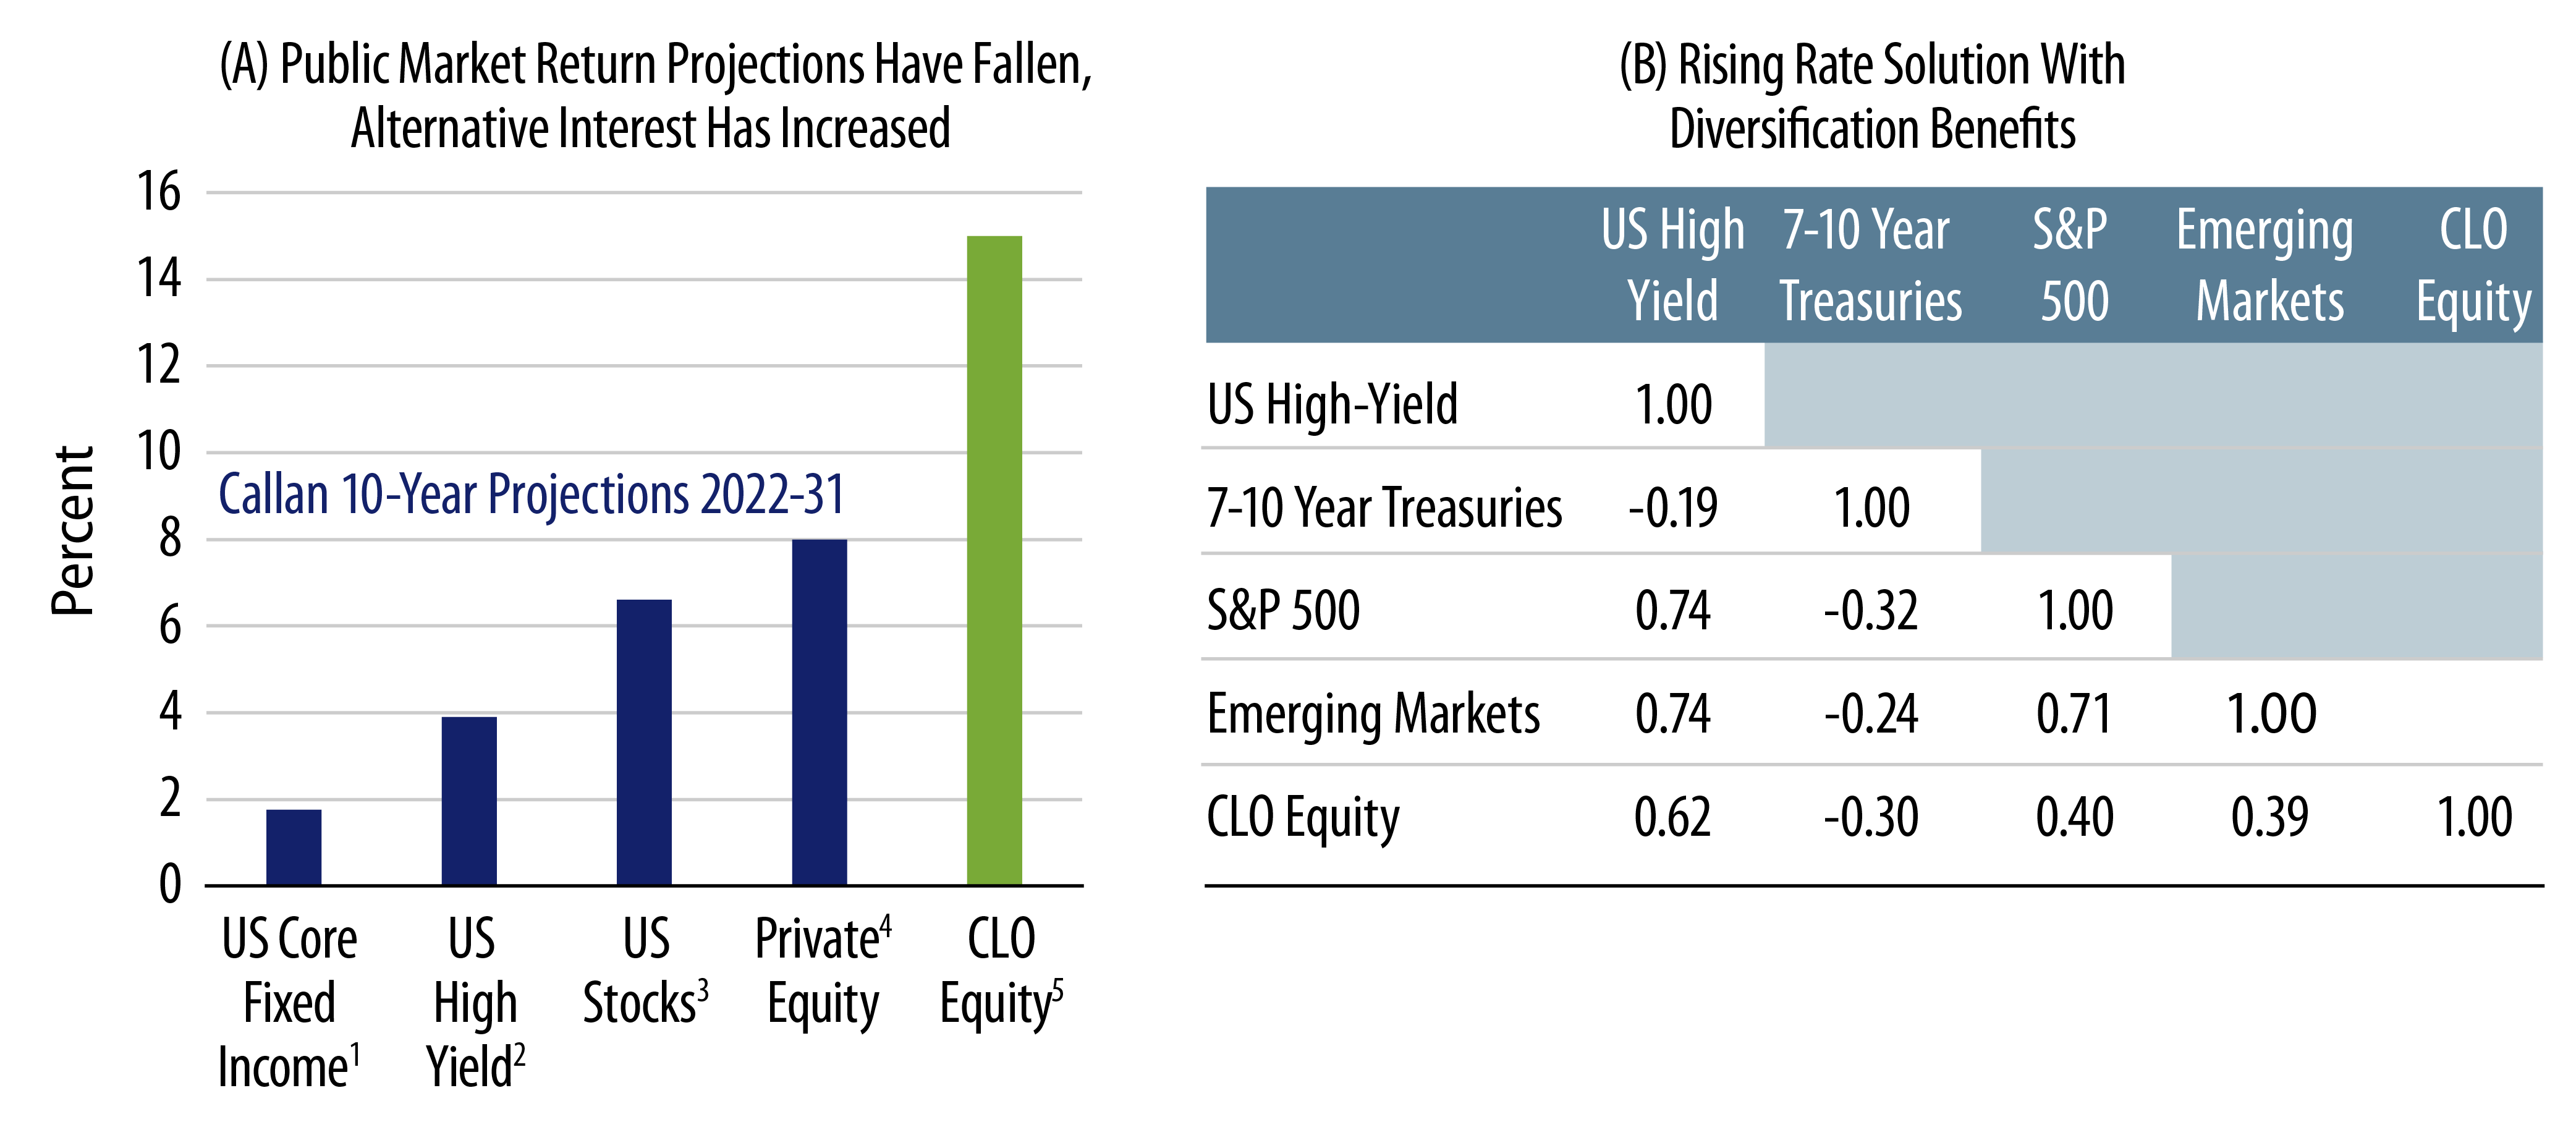 CLO Equity Compared to Other Asset Classes